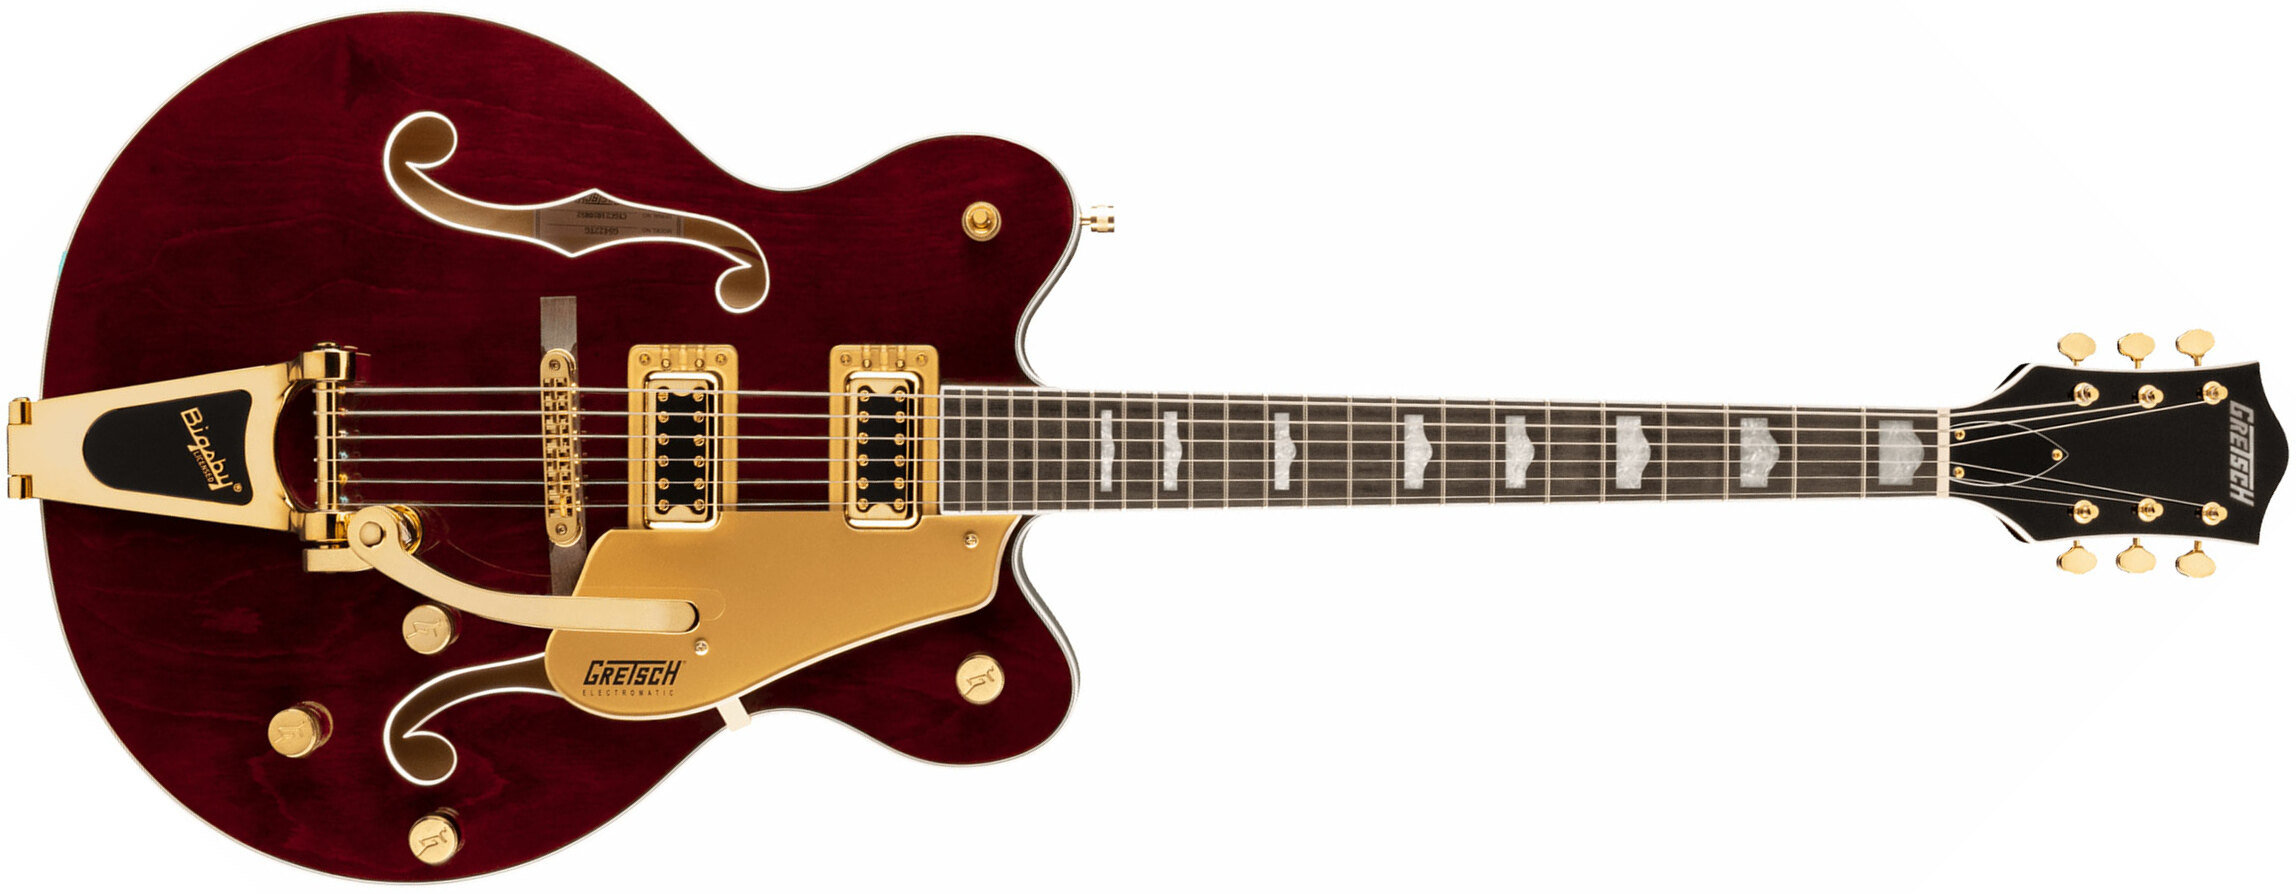 Gretsch G5422tg Electromatic Classic Hollow Body Dc Bigsby Hh Lau - Walnut Stain - Semi-hollow electric guitar - Main picture